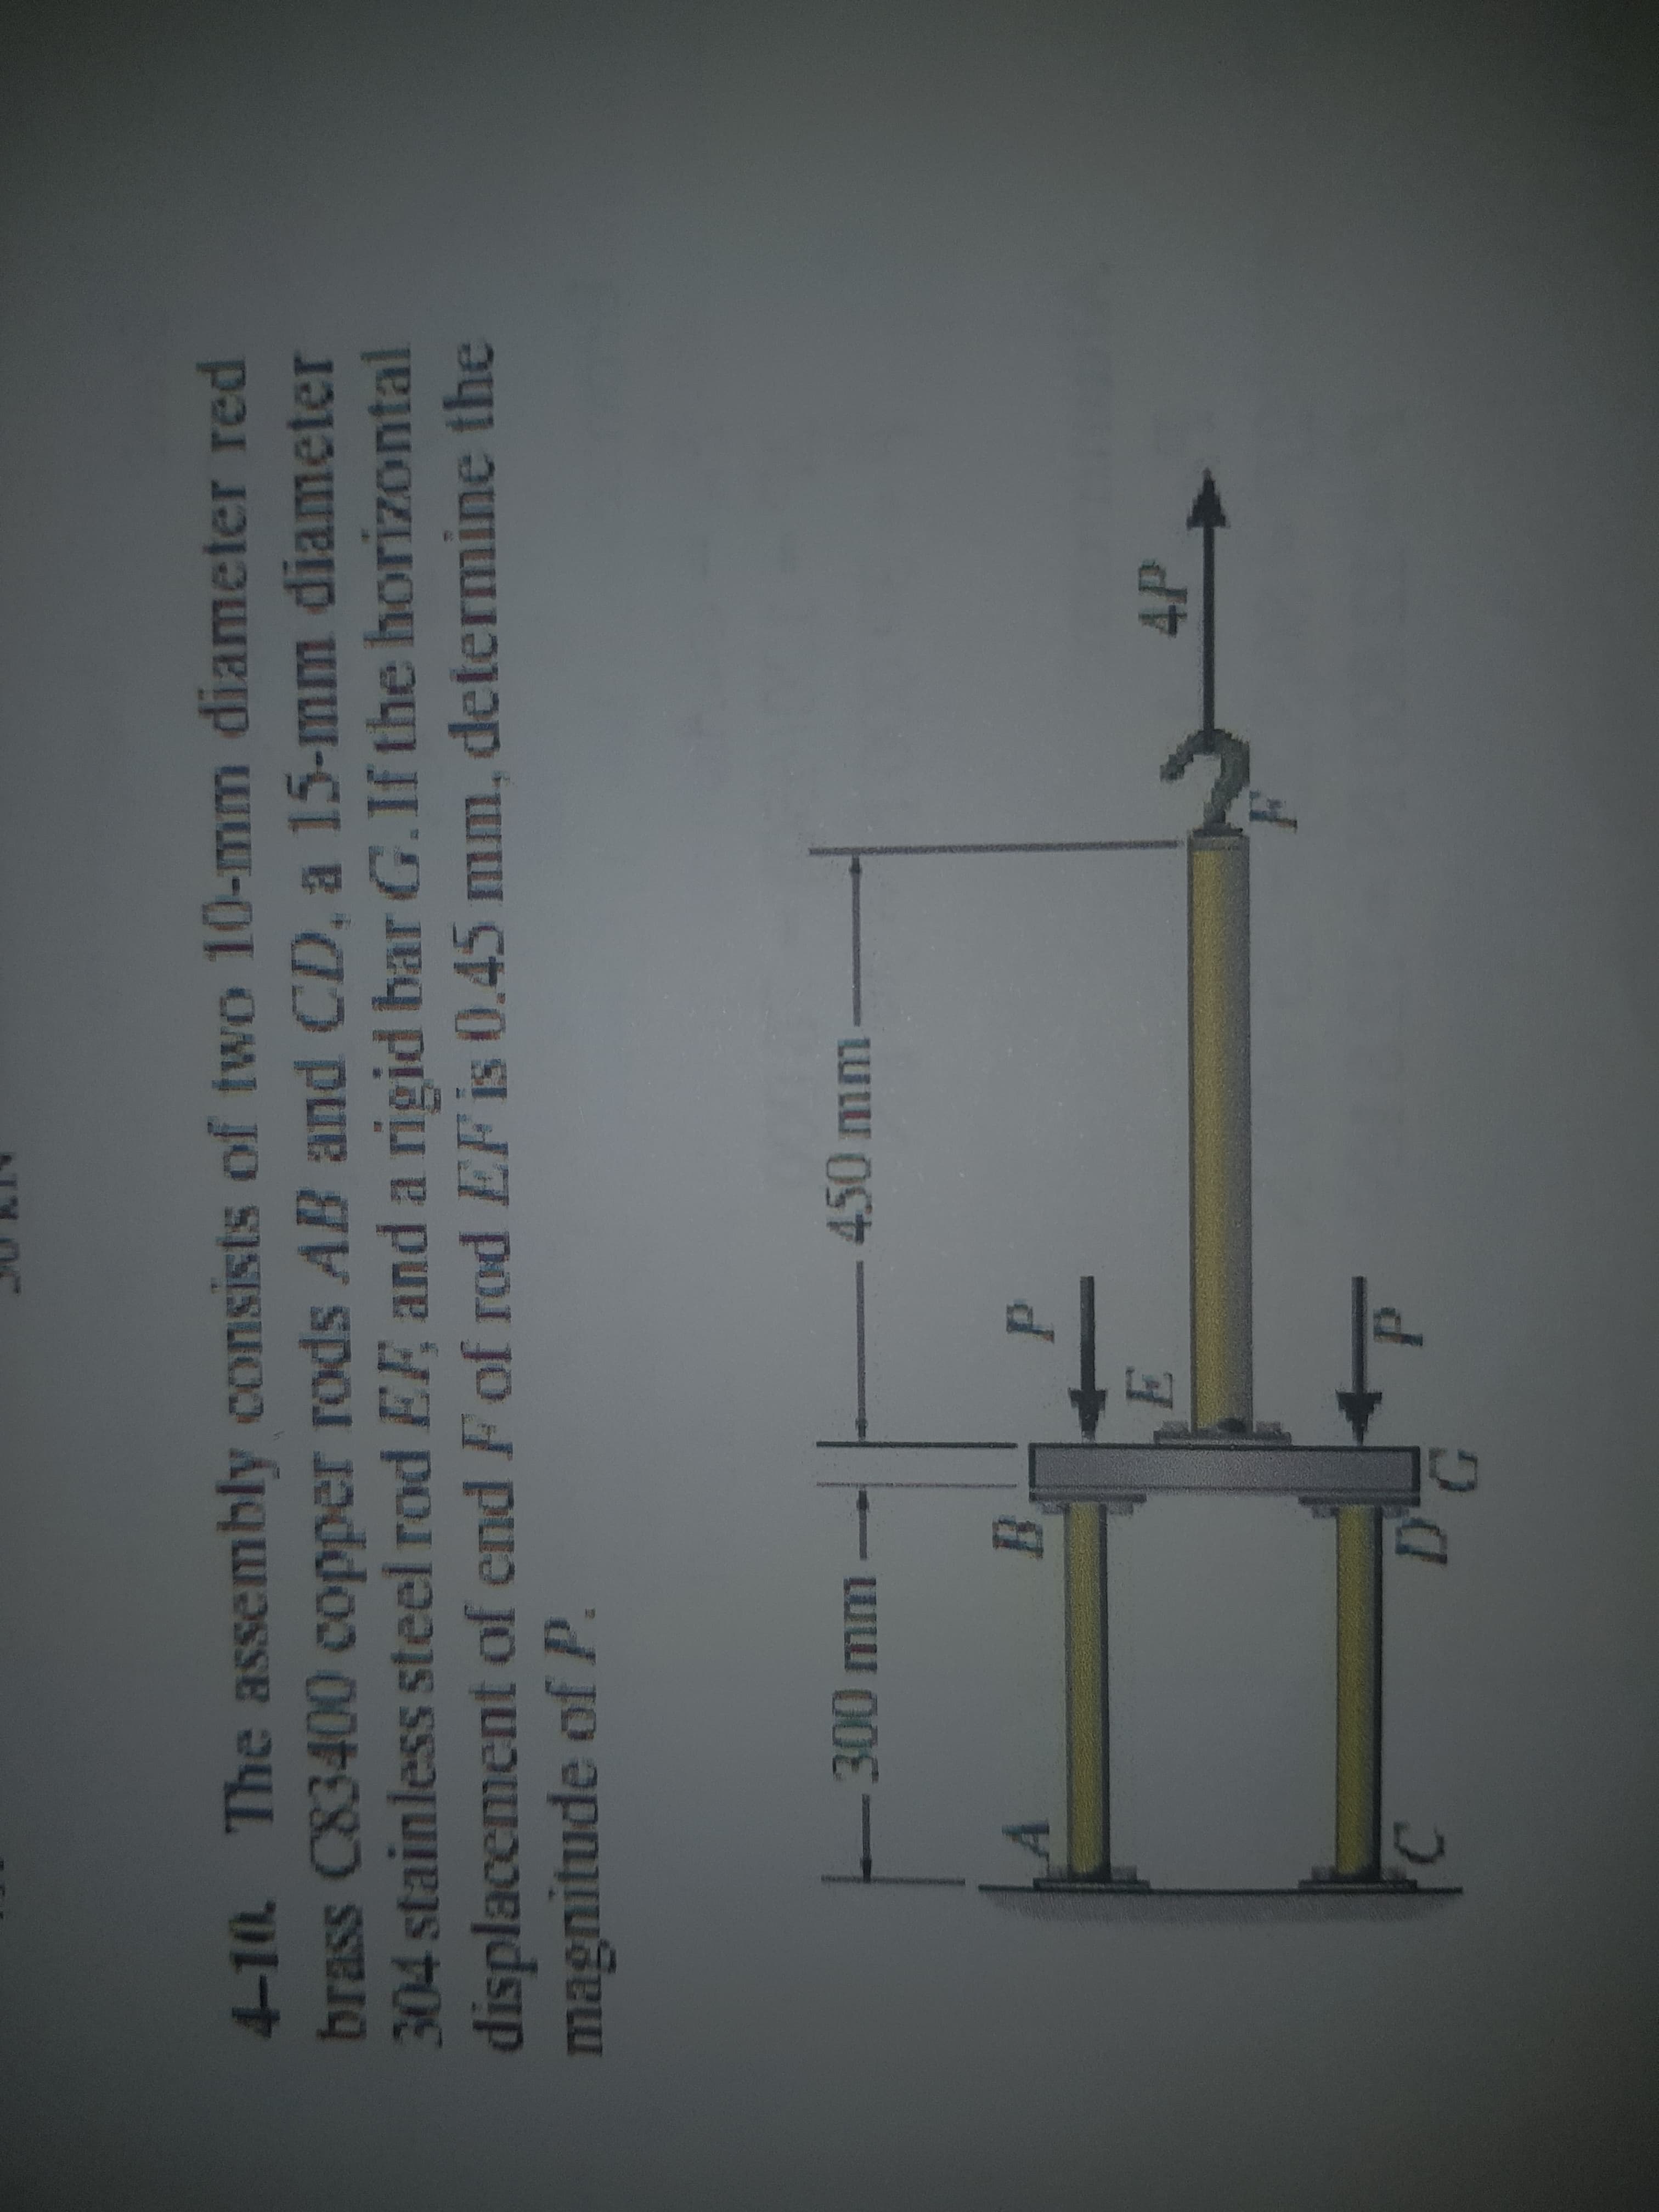 410. The assembly consists of two 10-mm diameter red
brass C83400 copper rods AB and CD, a 15-mm diameter
304 stainless steel rod EF, and a rigid bar G.If the horizontal
displacement of end Fof rod EF is 0.45 mm, determine the
magnitude of P.
